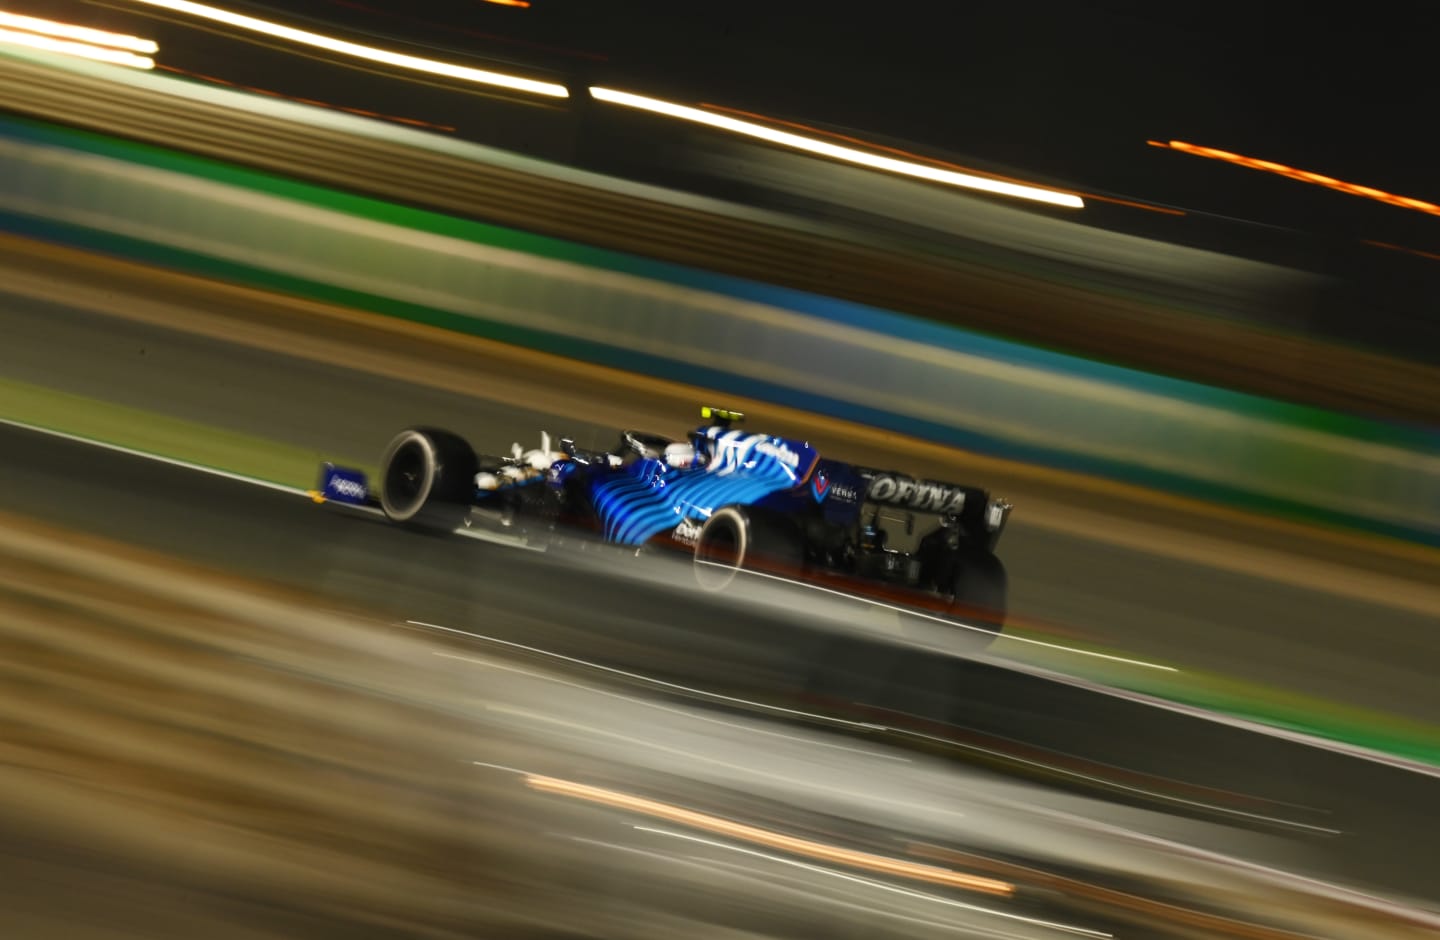 DOHA, QATAR - NOVEMBER 19: Nicholas Latifi of Canada driving the (6) Williams Racing FW43B Mercedes during practice ahead of the F1 Grand Prix of Qatar at Losail International Circuit on November 19, 2021 in Doha, Qatar. (Photo by Clive Mason/Getty Images)